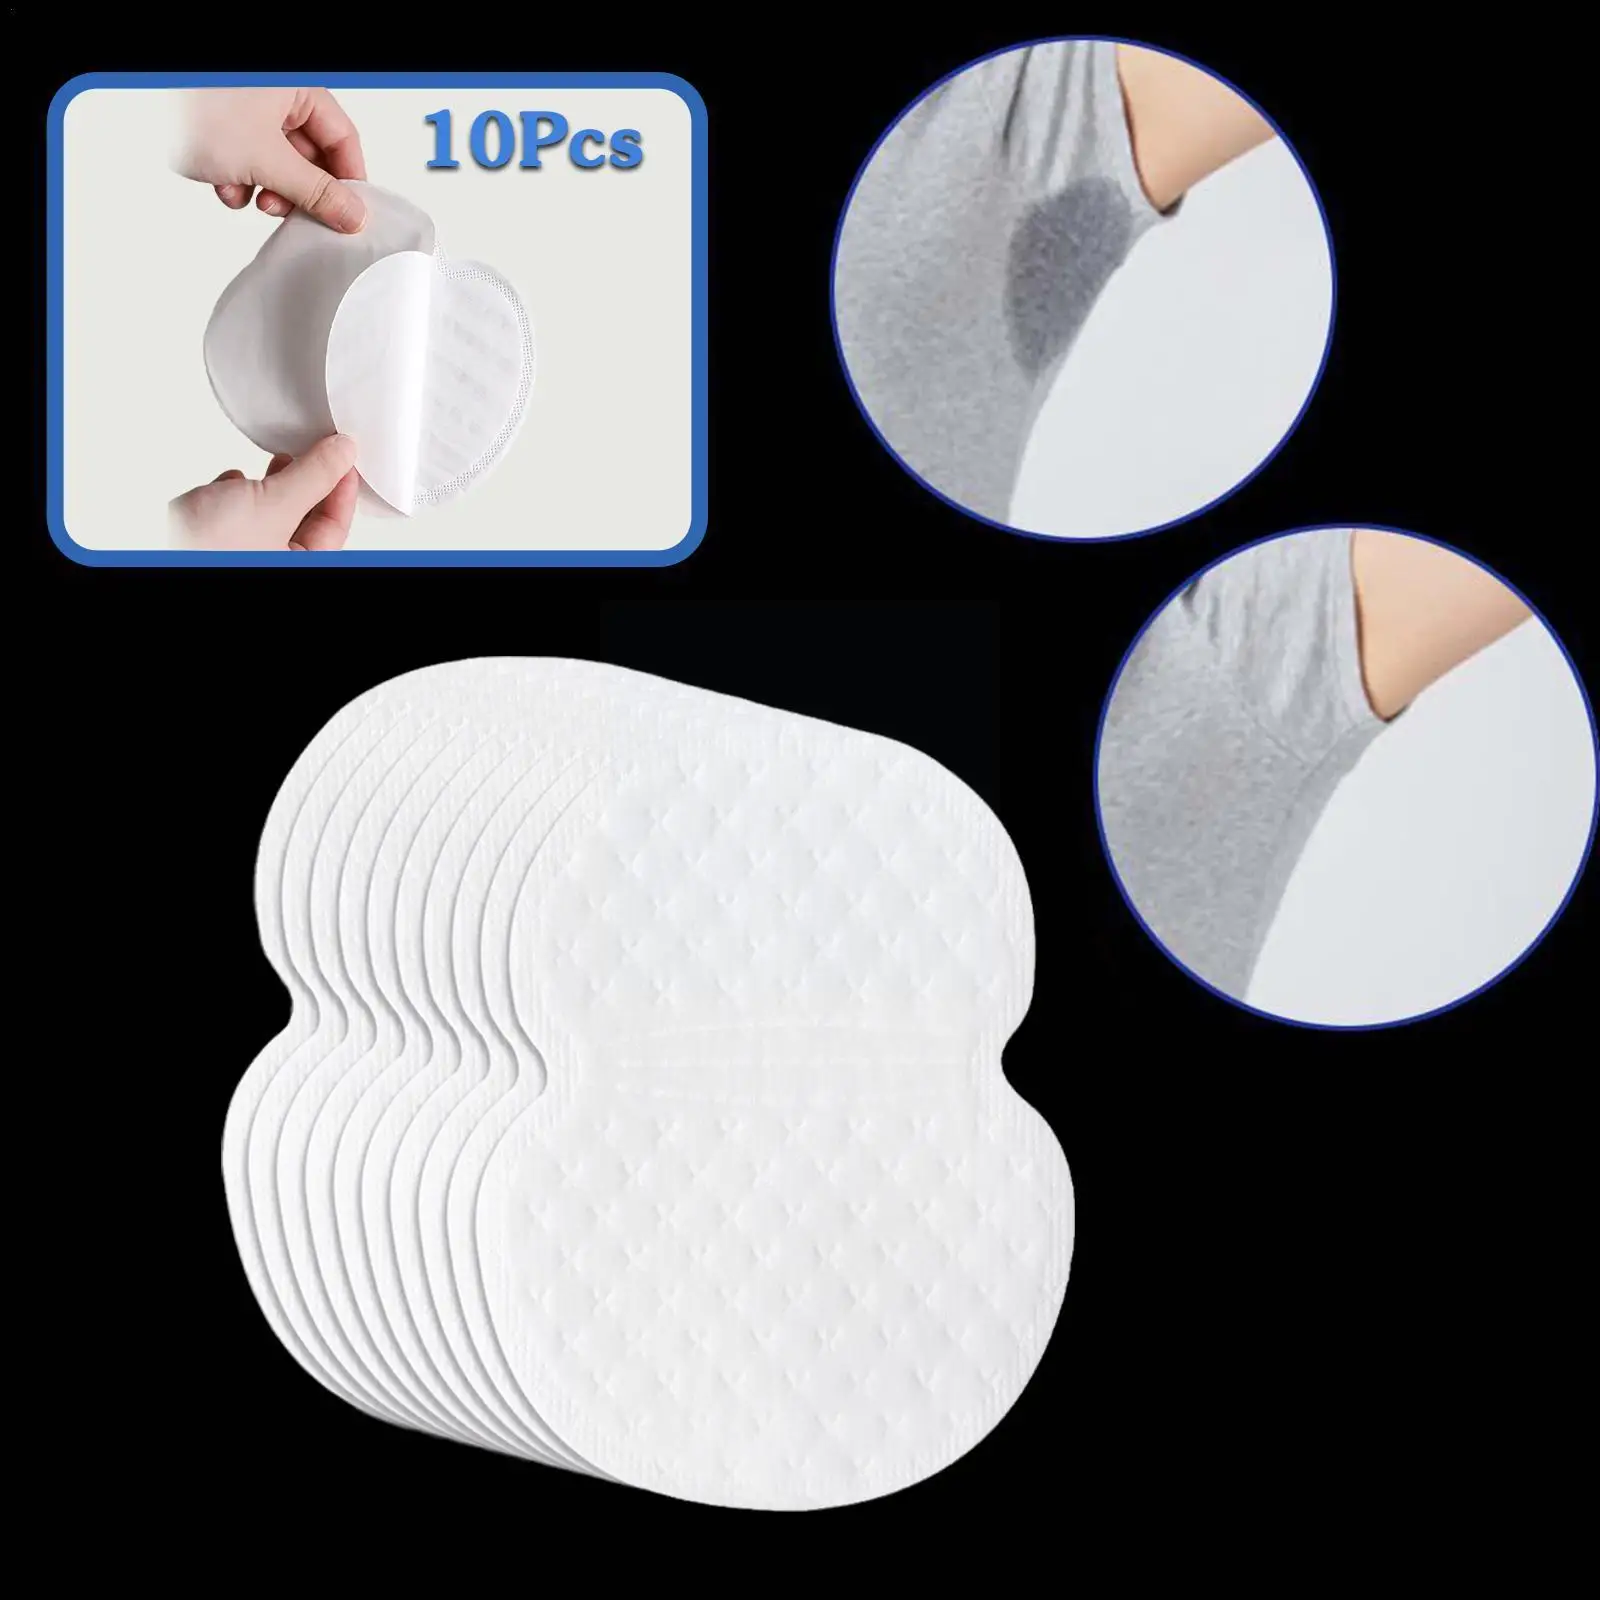 

10pcs Underarm Sweat Pads Absorb Liners Underarm Gasket From Sweat Armpit Stickers Anti Armpits Pads for Clothes Deodorant A2A9